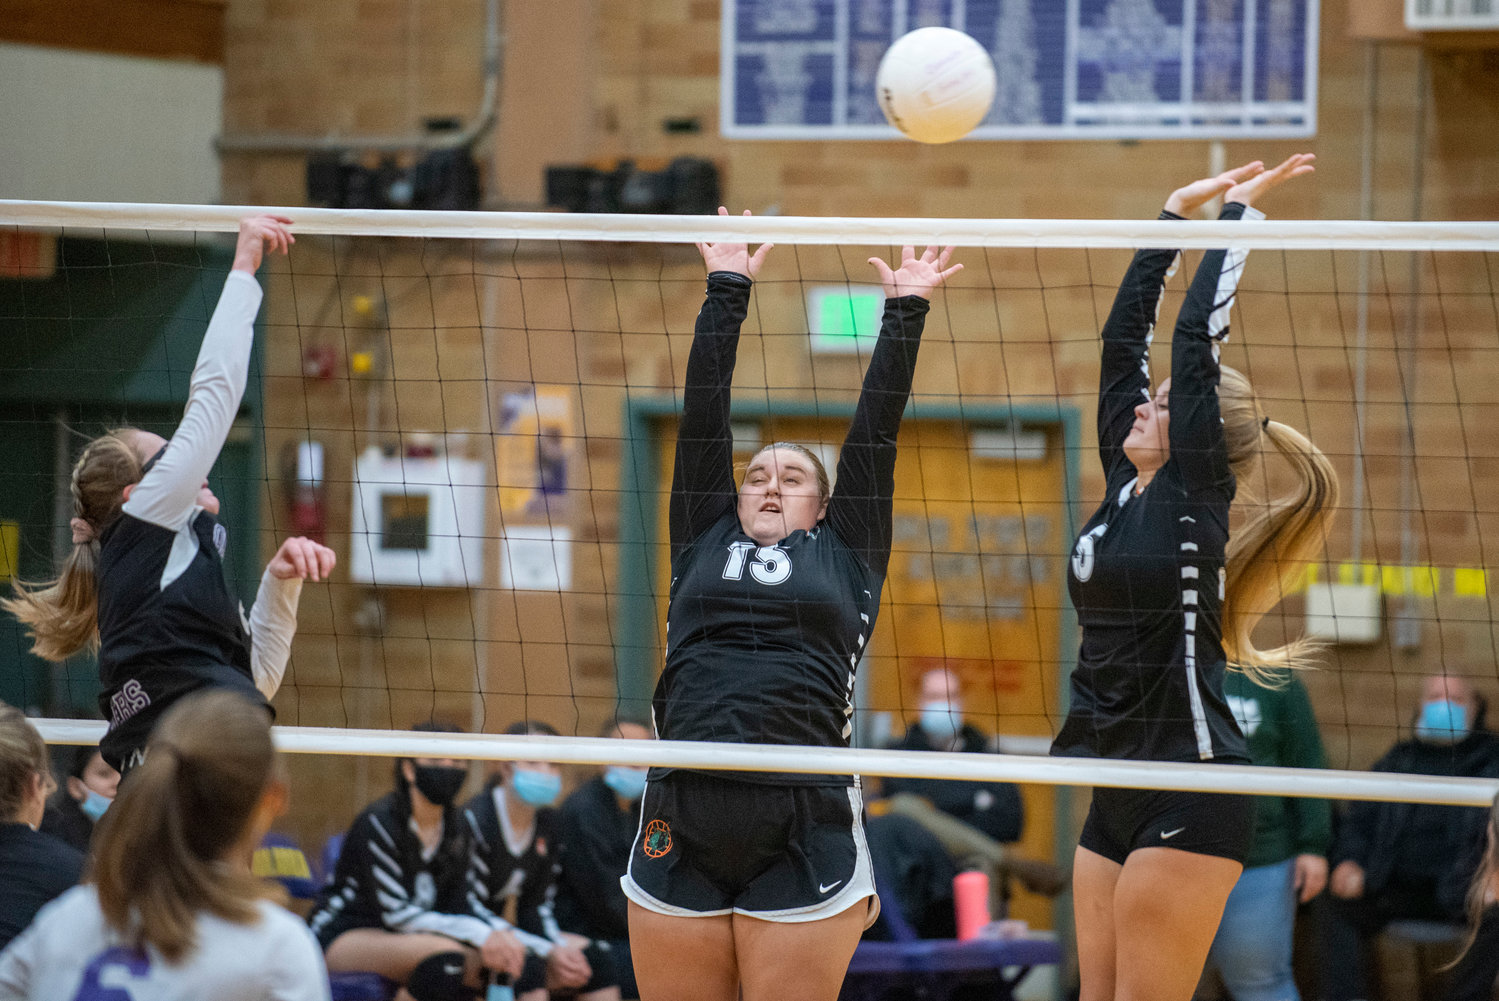 Morton-White Pass' Kelly Pakar (15) and Breejah Townsend (5) attempt to block a spike against Onalaska's Hannah James on Oct. 25, 2021.